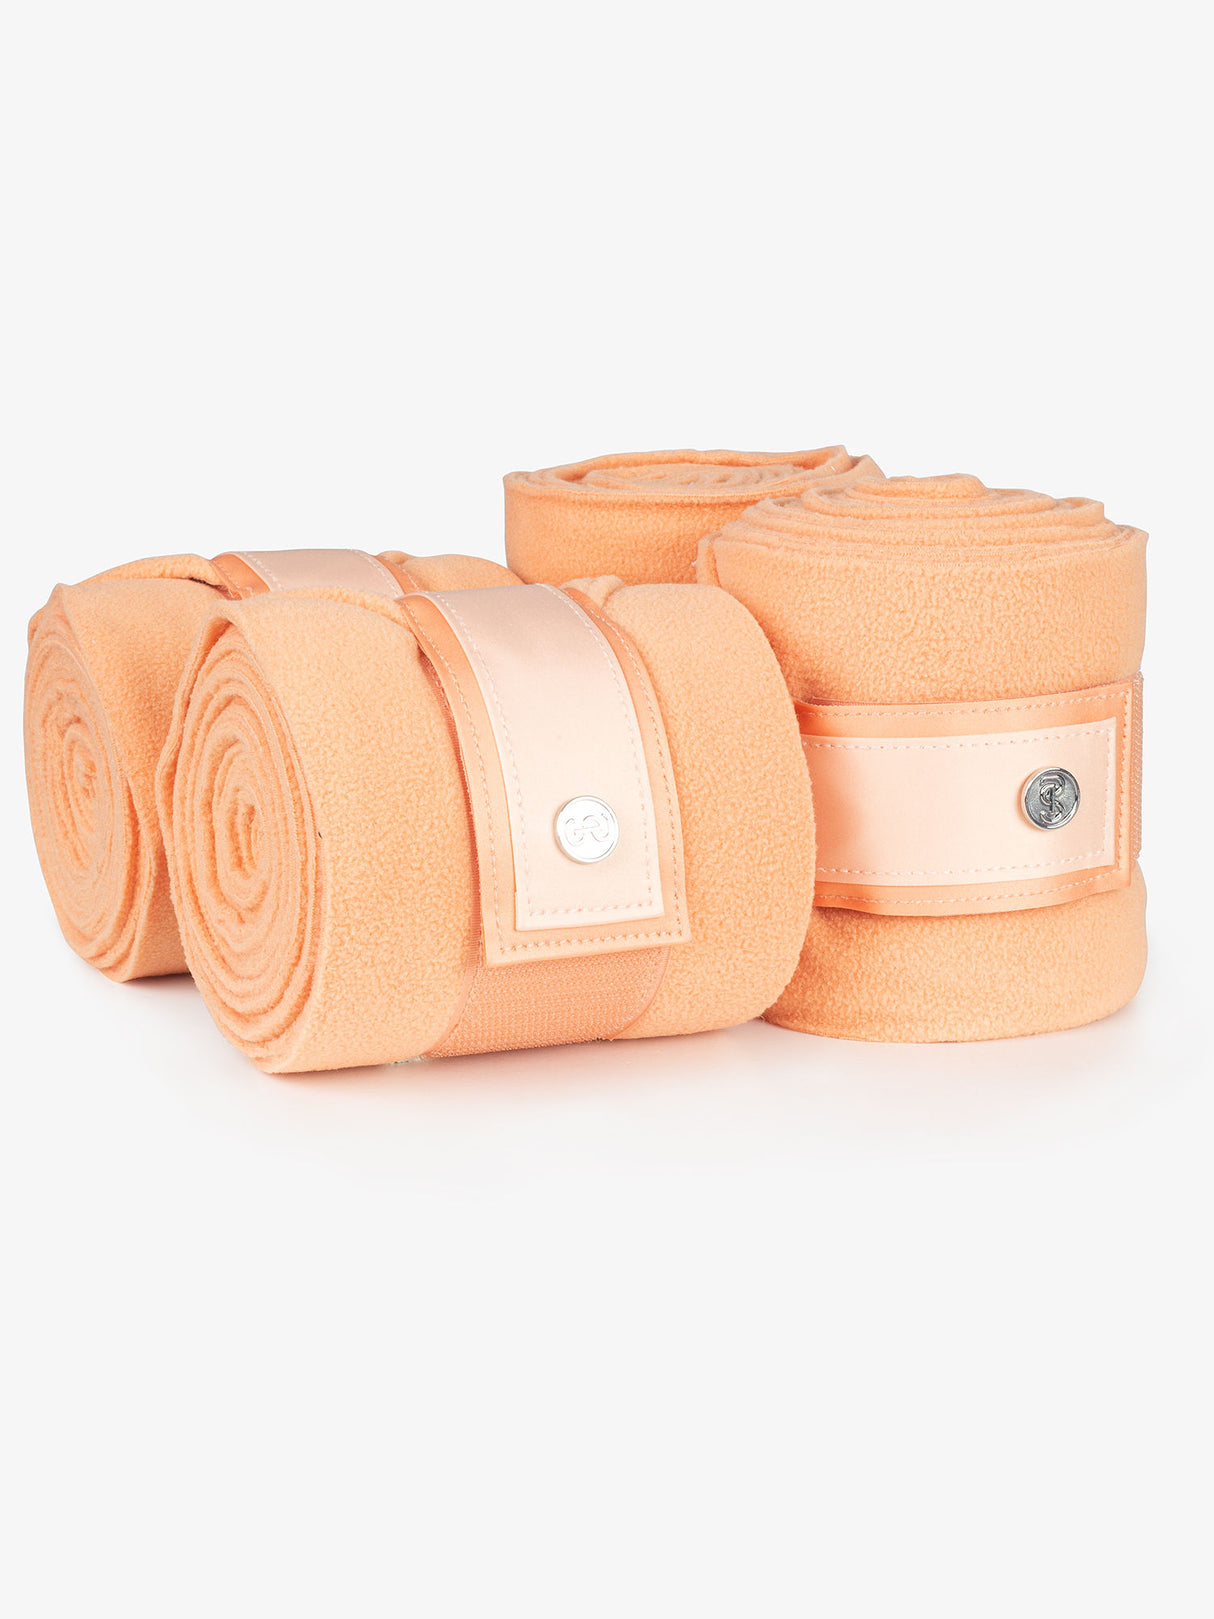 PS of Sweden Signature Bandages Coral